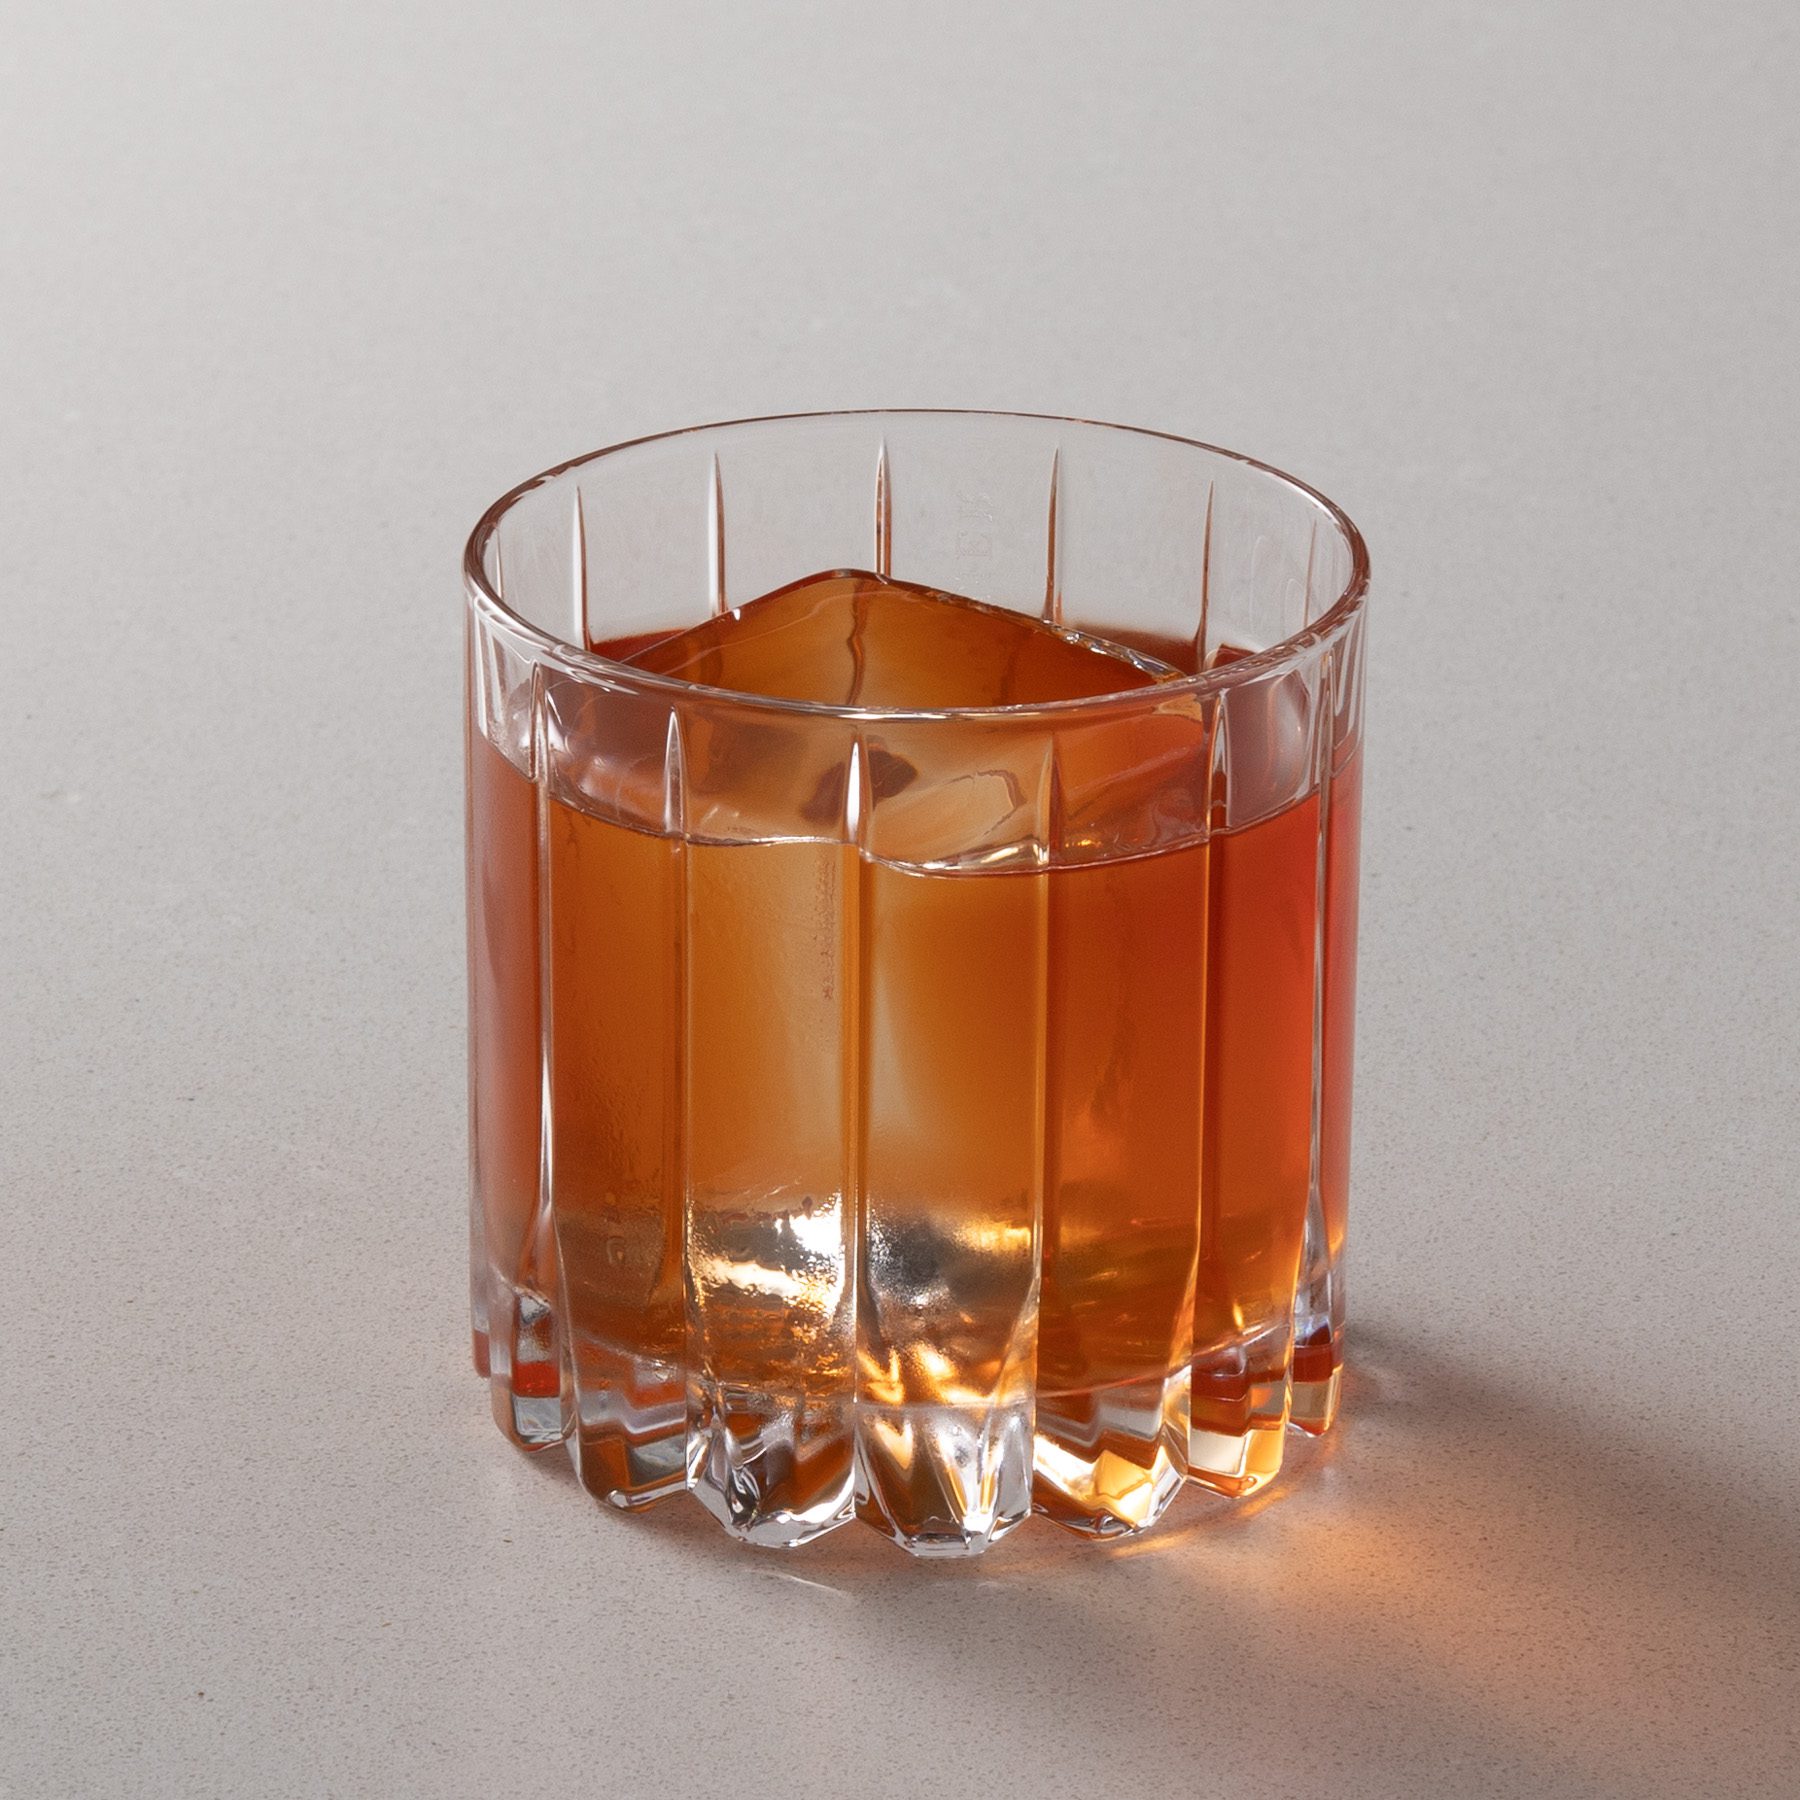 Dante's Old Fashioned cocktail